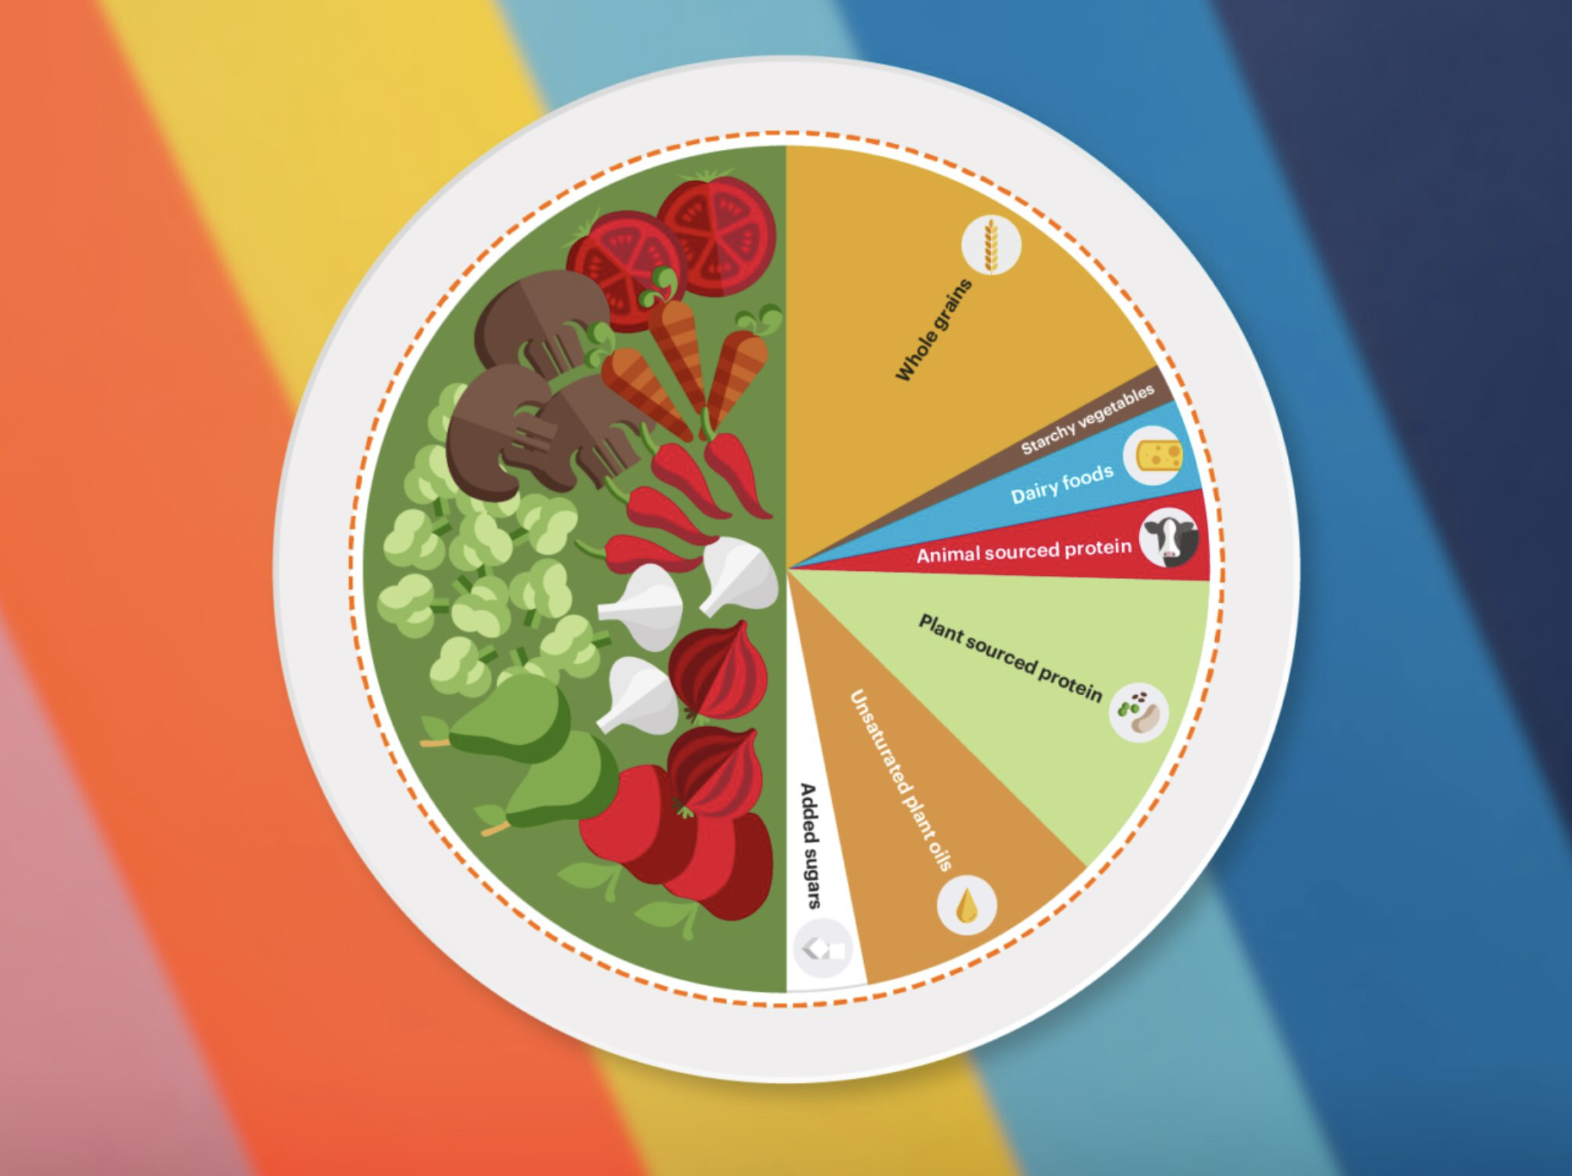 A plate representing food breakdown of the Planetary Health Diet